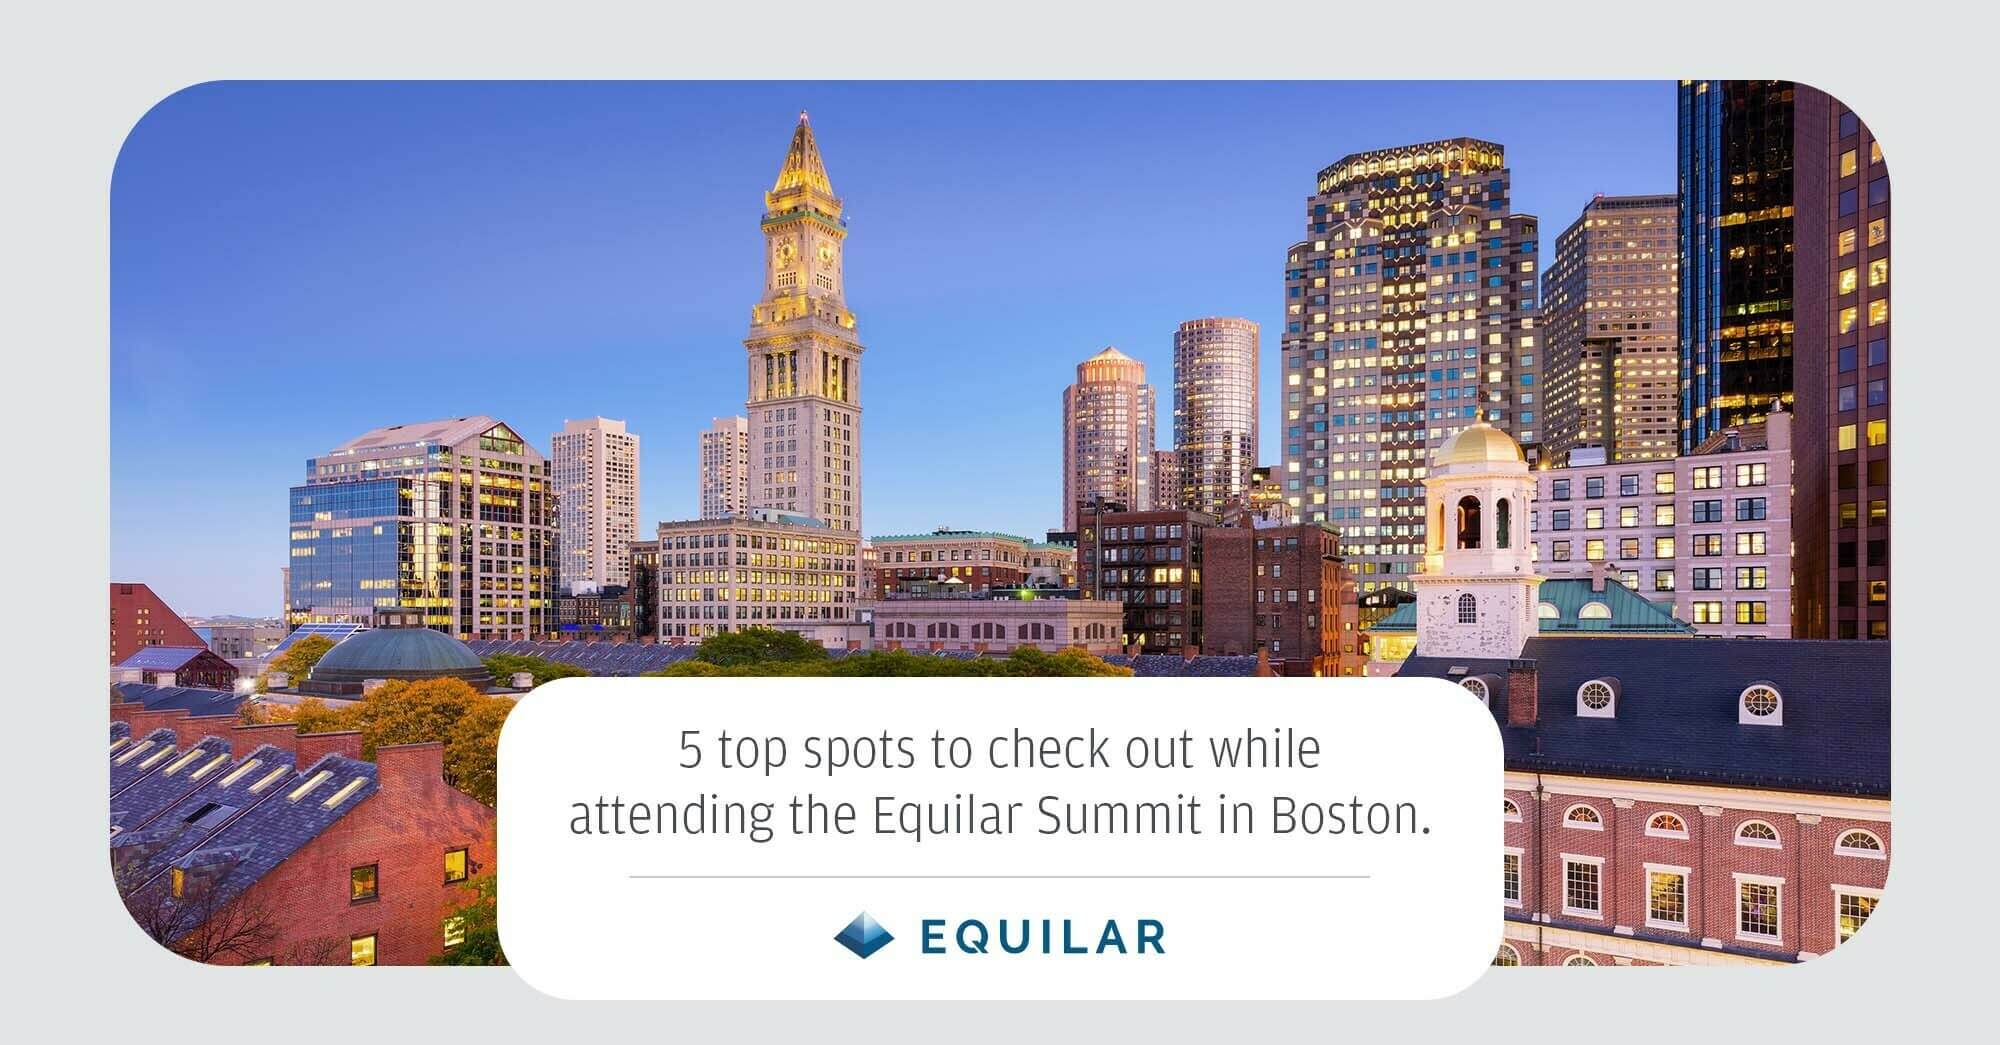 5 top spots to check out while attending the Equilar Summit in Boston